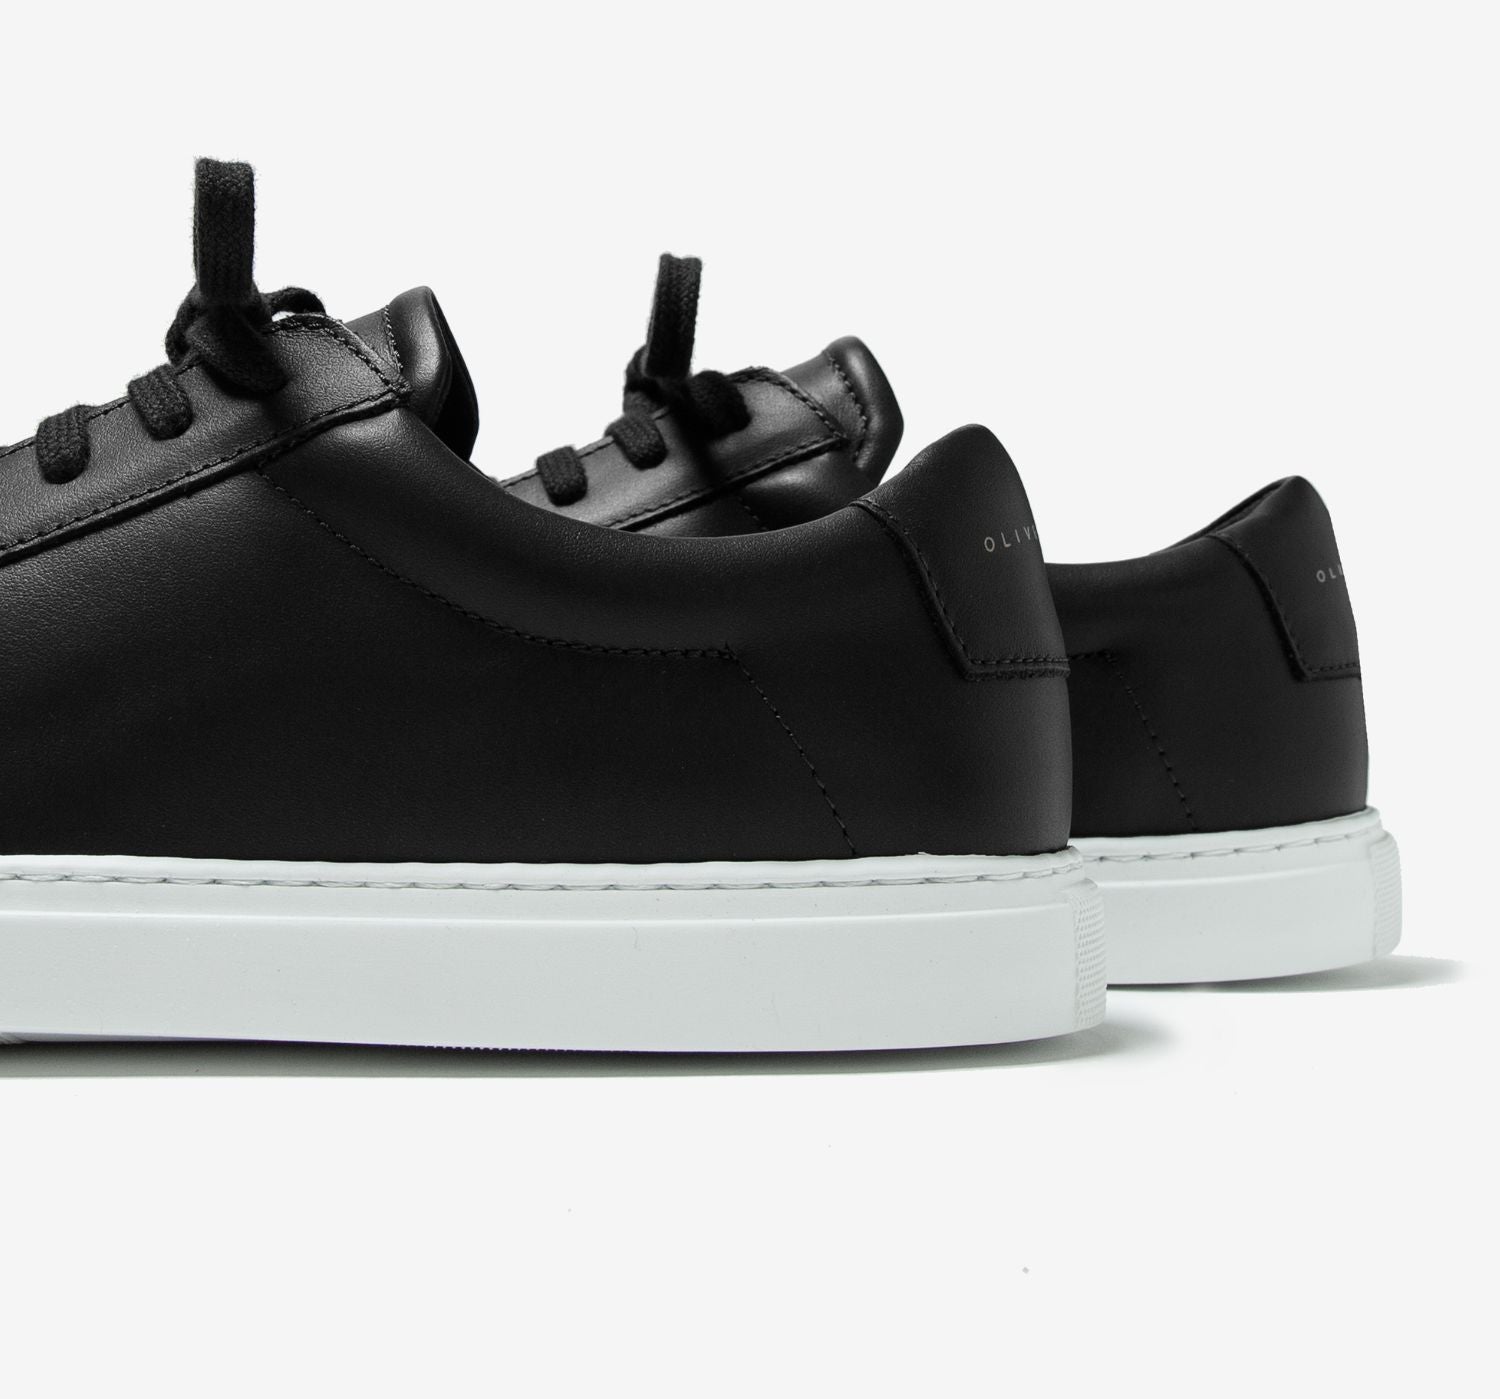 Find Your Swagger With the Best Men's Black Sneakers - Oliver Cabell